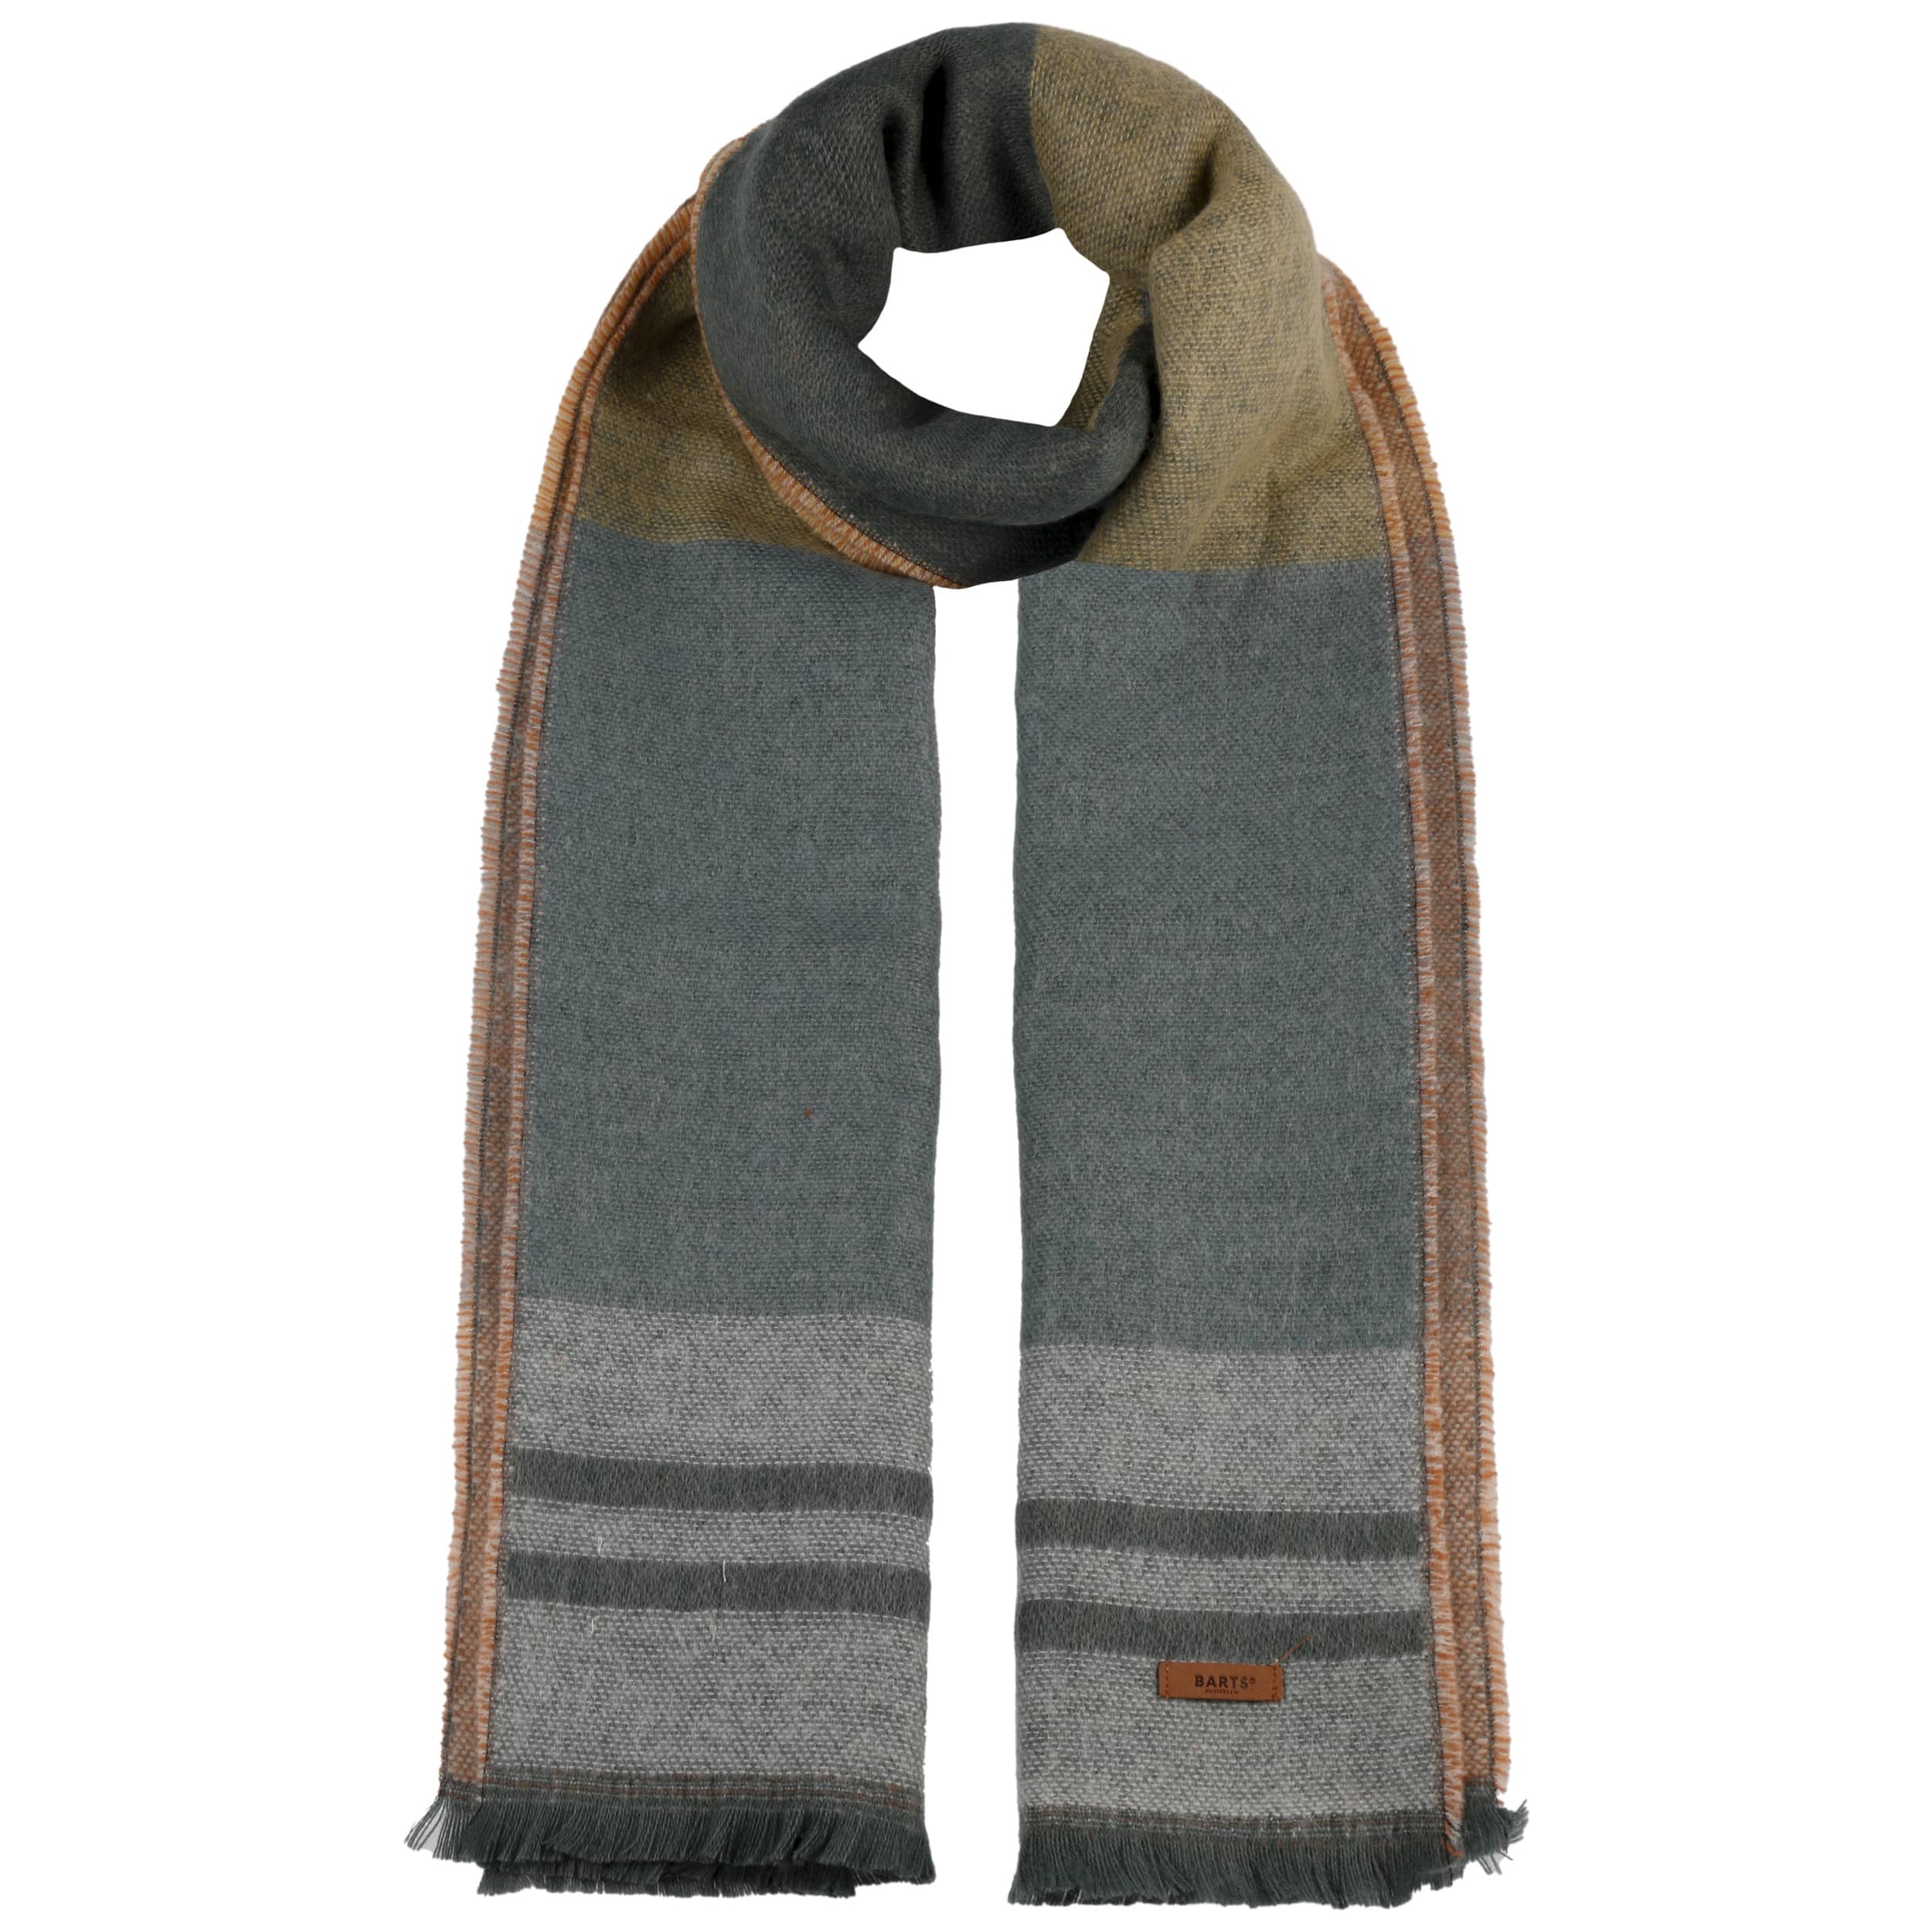 Knight Scarf by Barts - 48,95